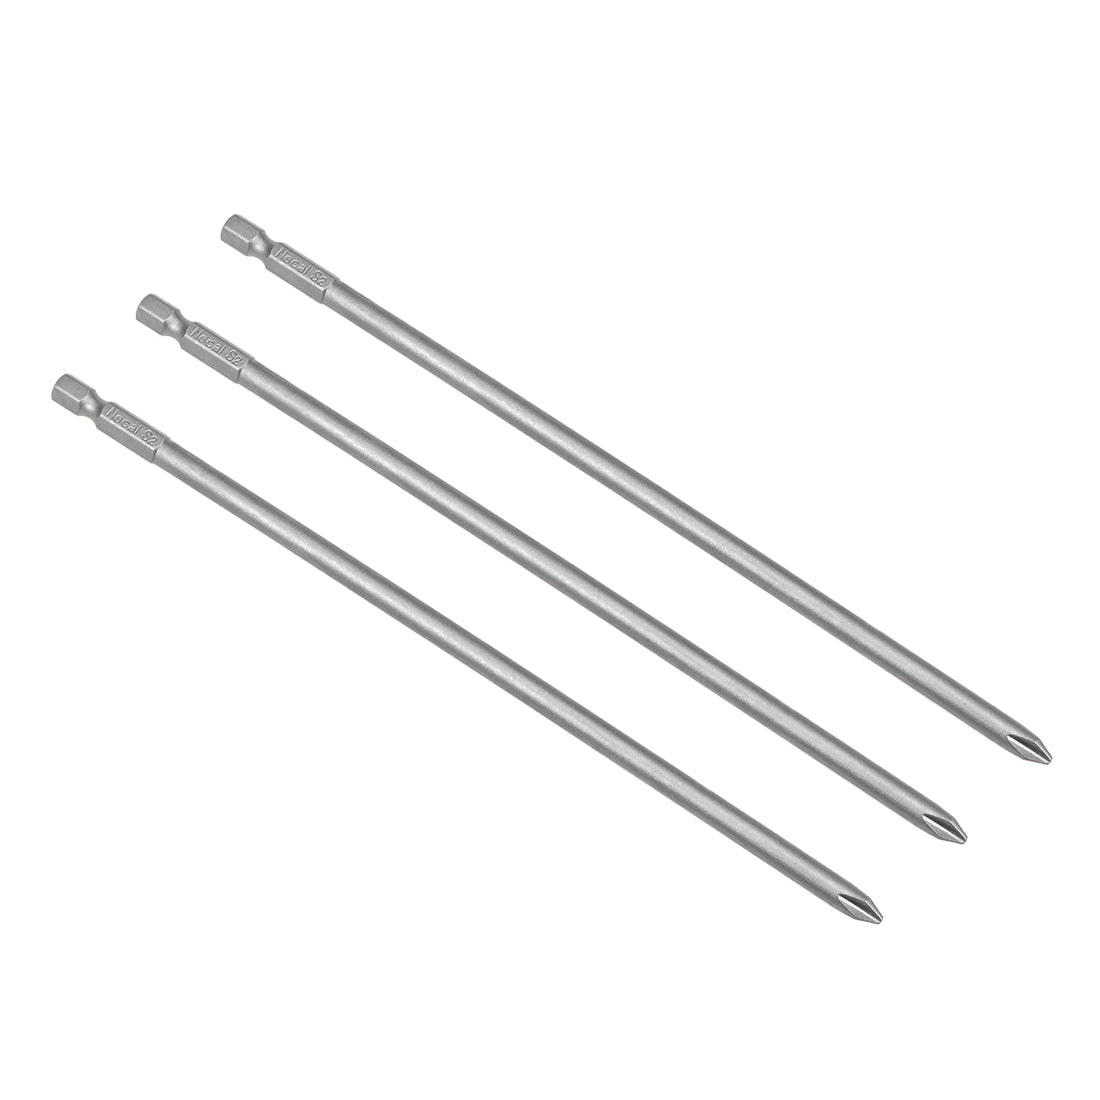 uxcell Uxcell 3Pcs 1/4-Inch Hex Shank 200mm Length Phillips 6PH2 Magnetic S2 Screwdriver Bits